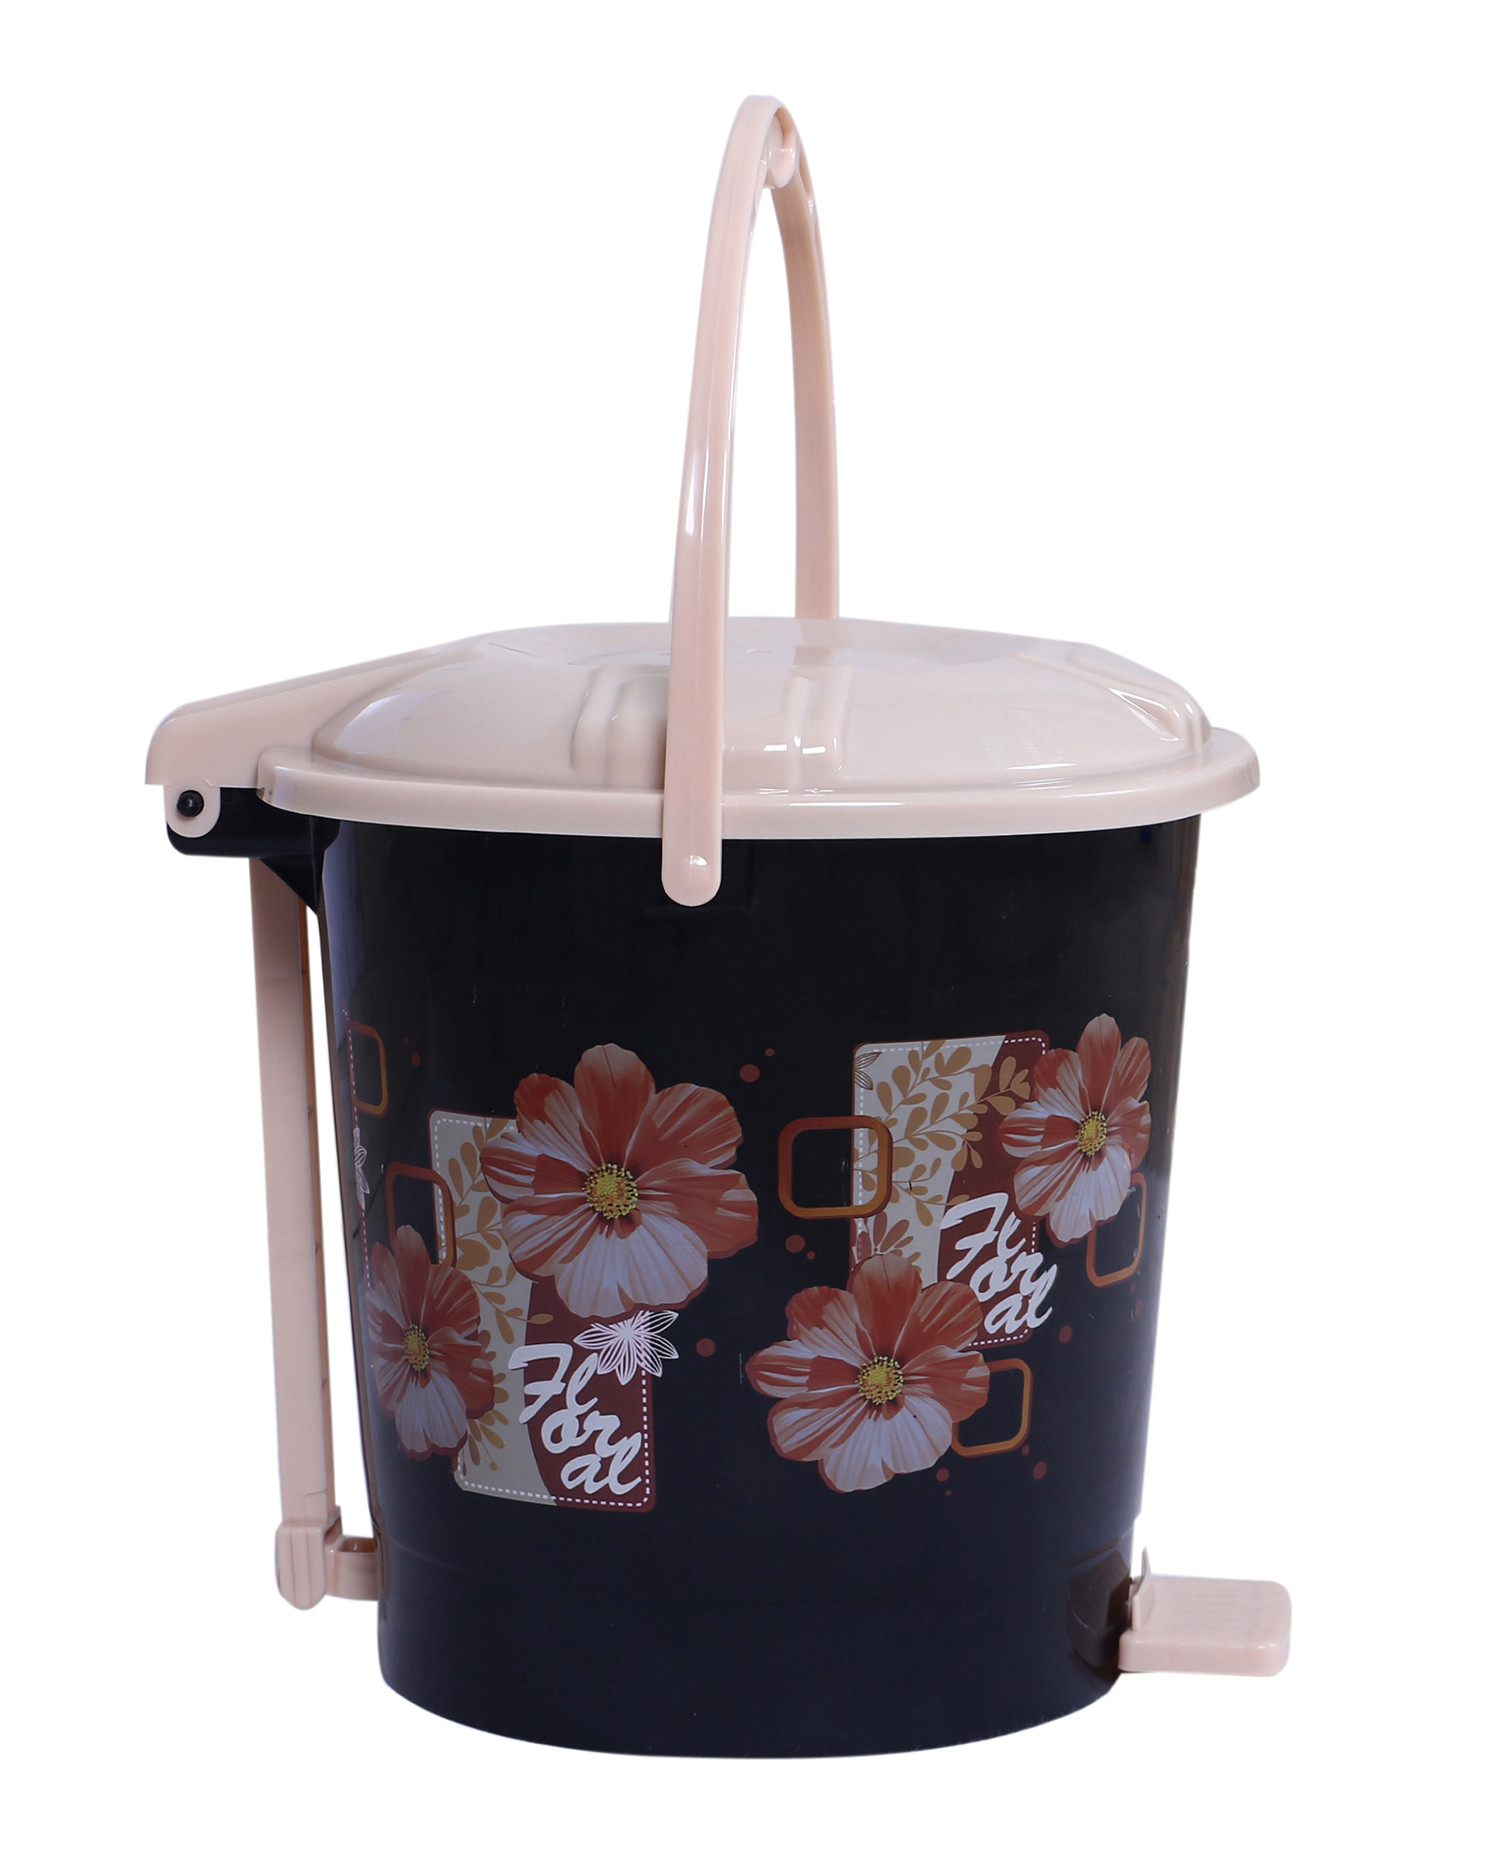 Kuber Industries Durable Floral Print Plastic Pedal Dustbin|Waste Bin|Trash Can For Kitchen & Home With Handle,7 Litre,Pack of 2 (Black)